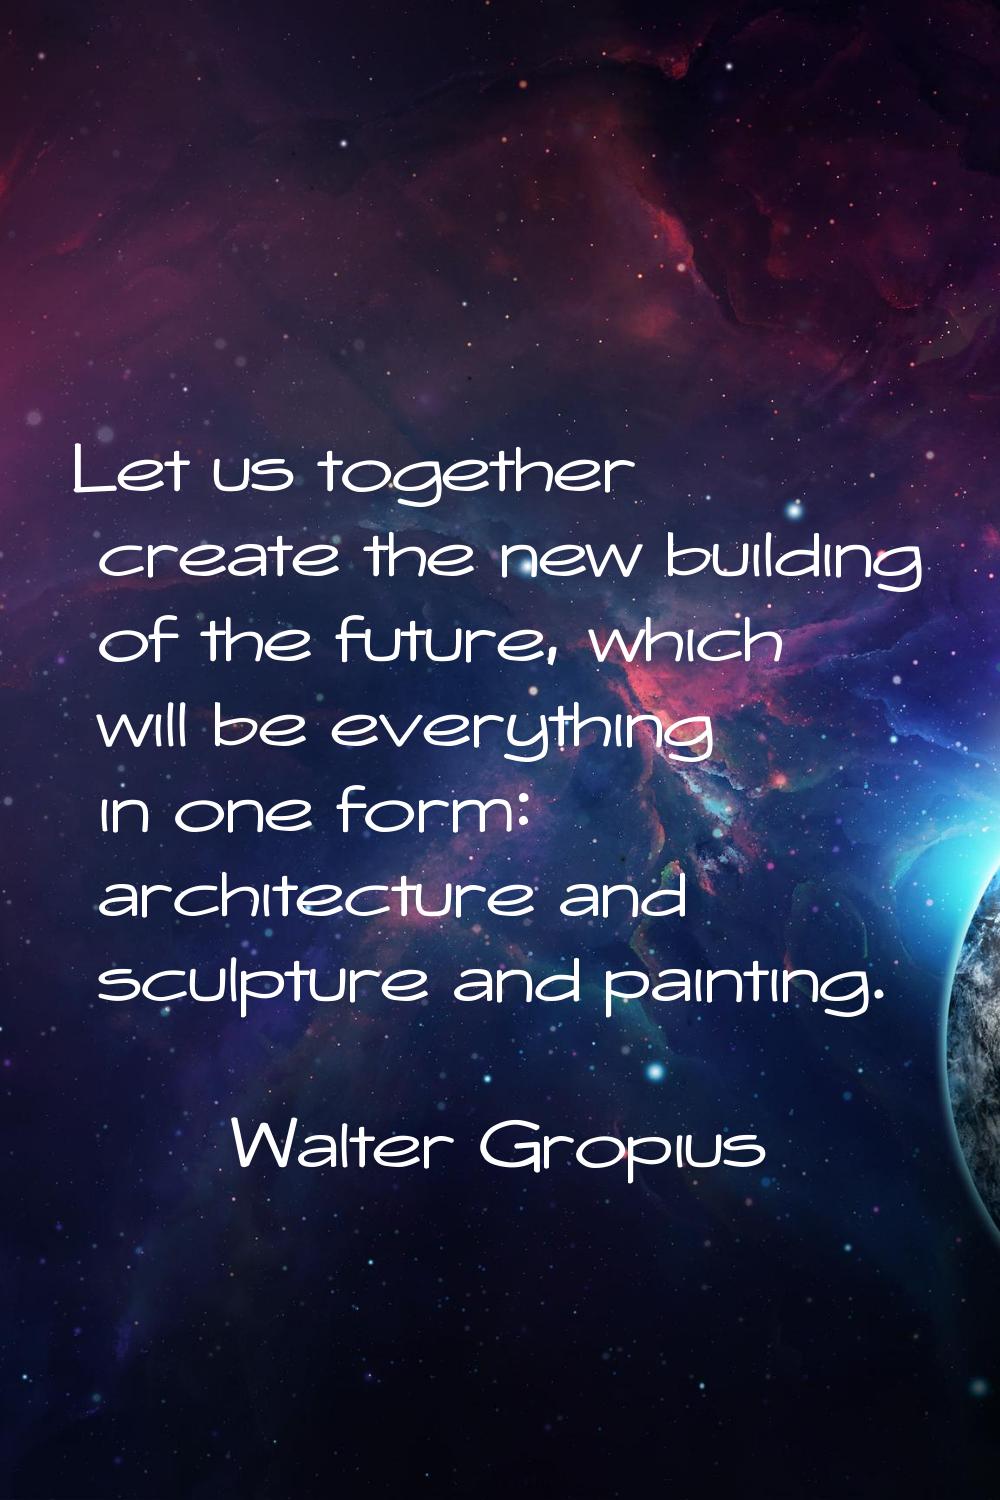 Let us together create the new building of the future, which will be everything in one form: archit